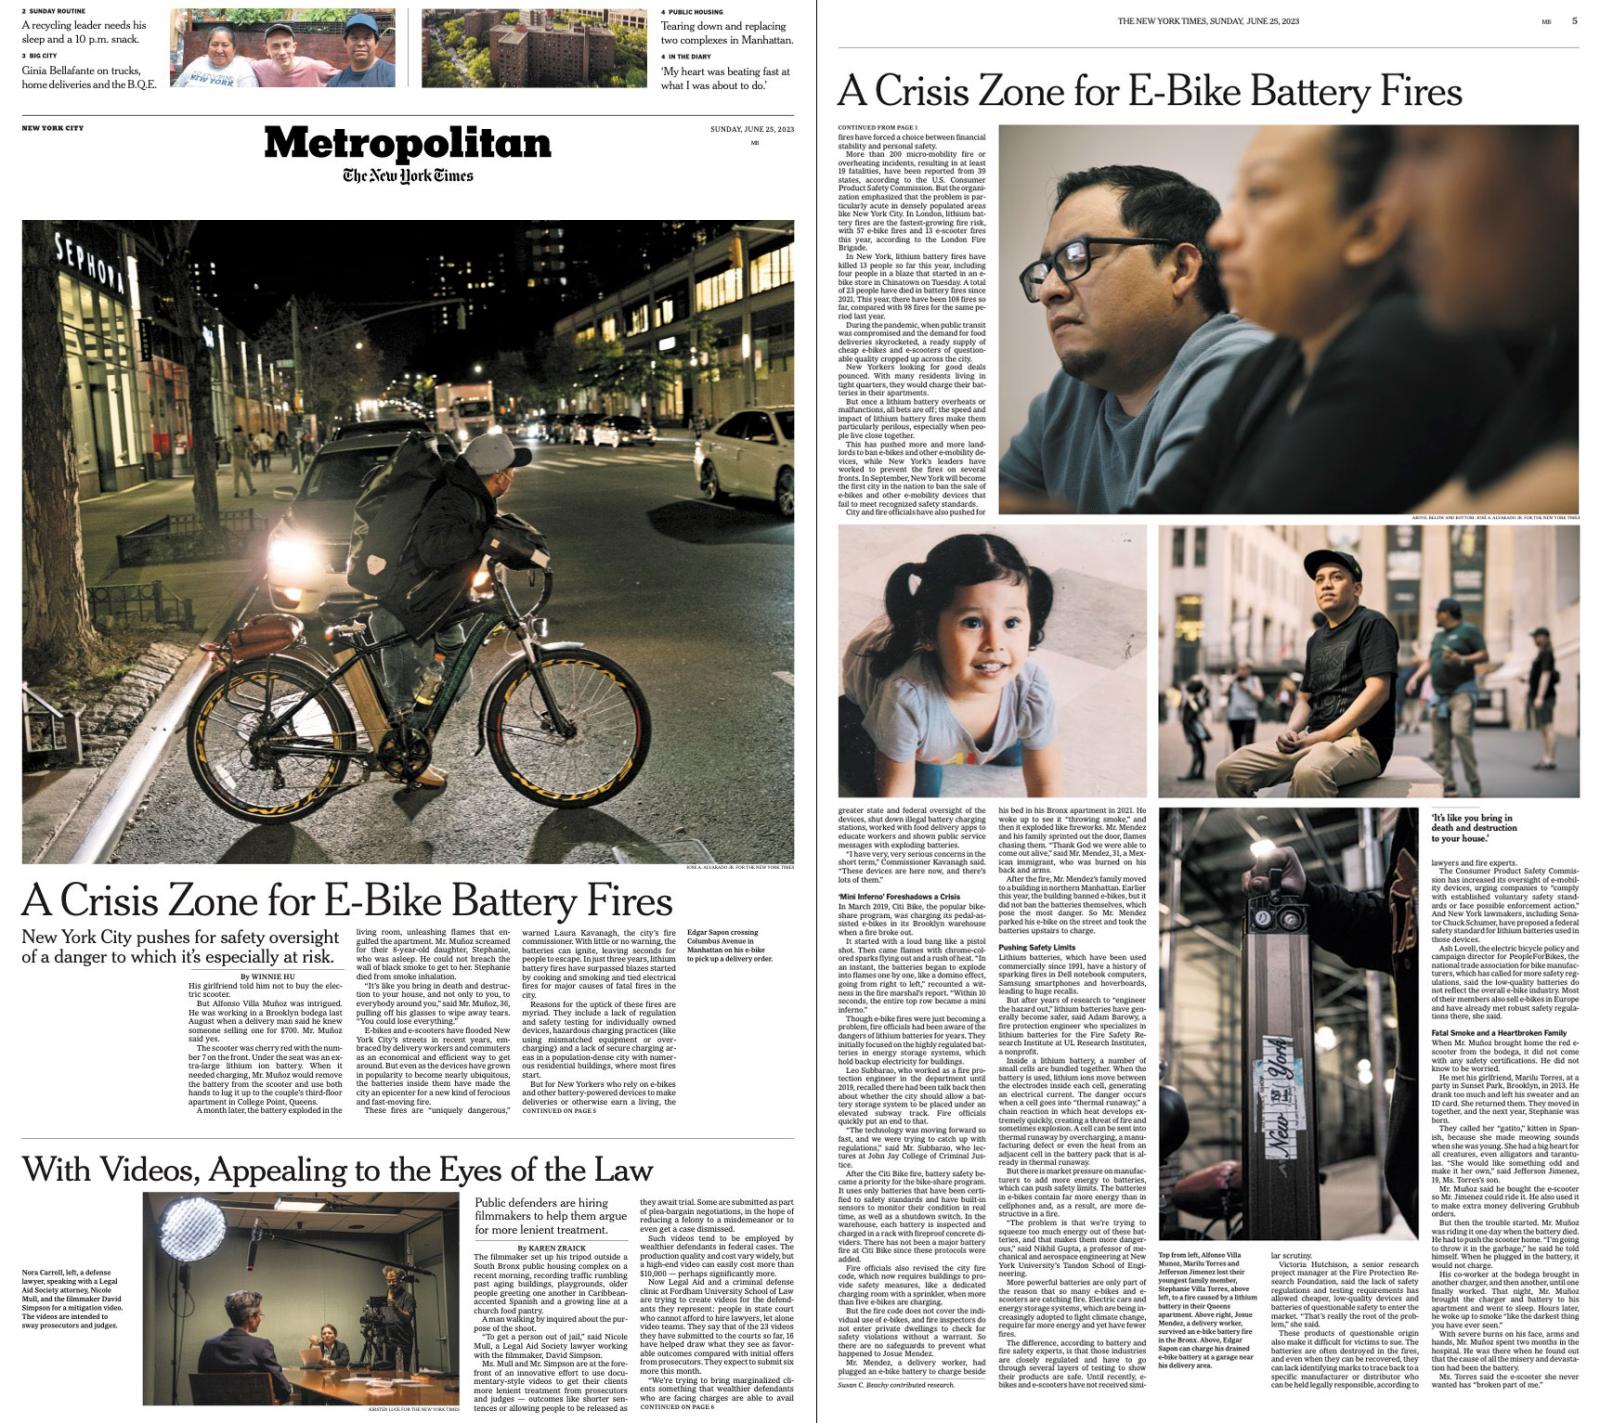 Thumbnail of for The New York Times: A Crisis Zone for E-Bike Battery Fires